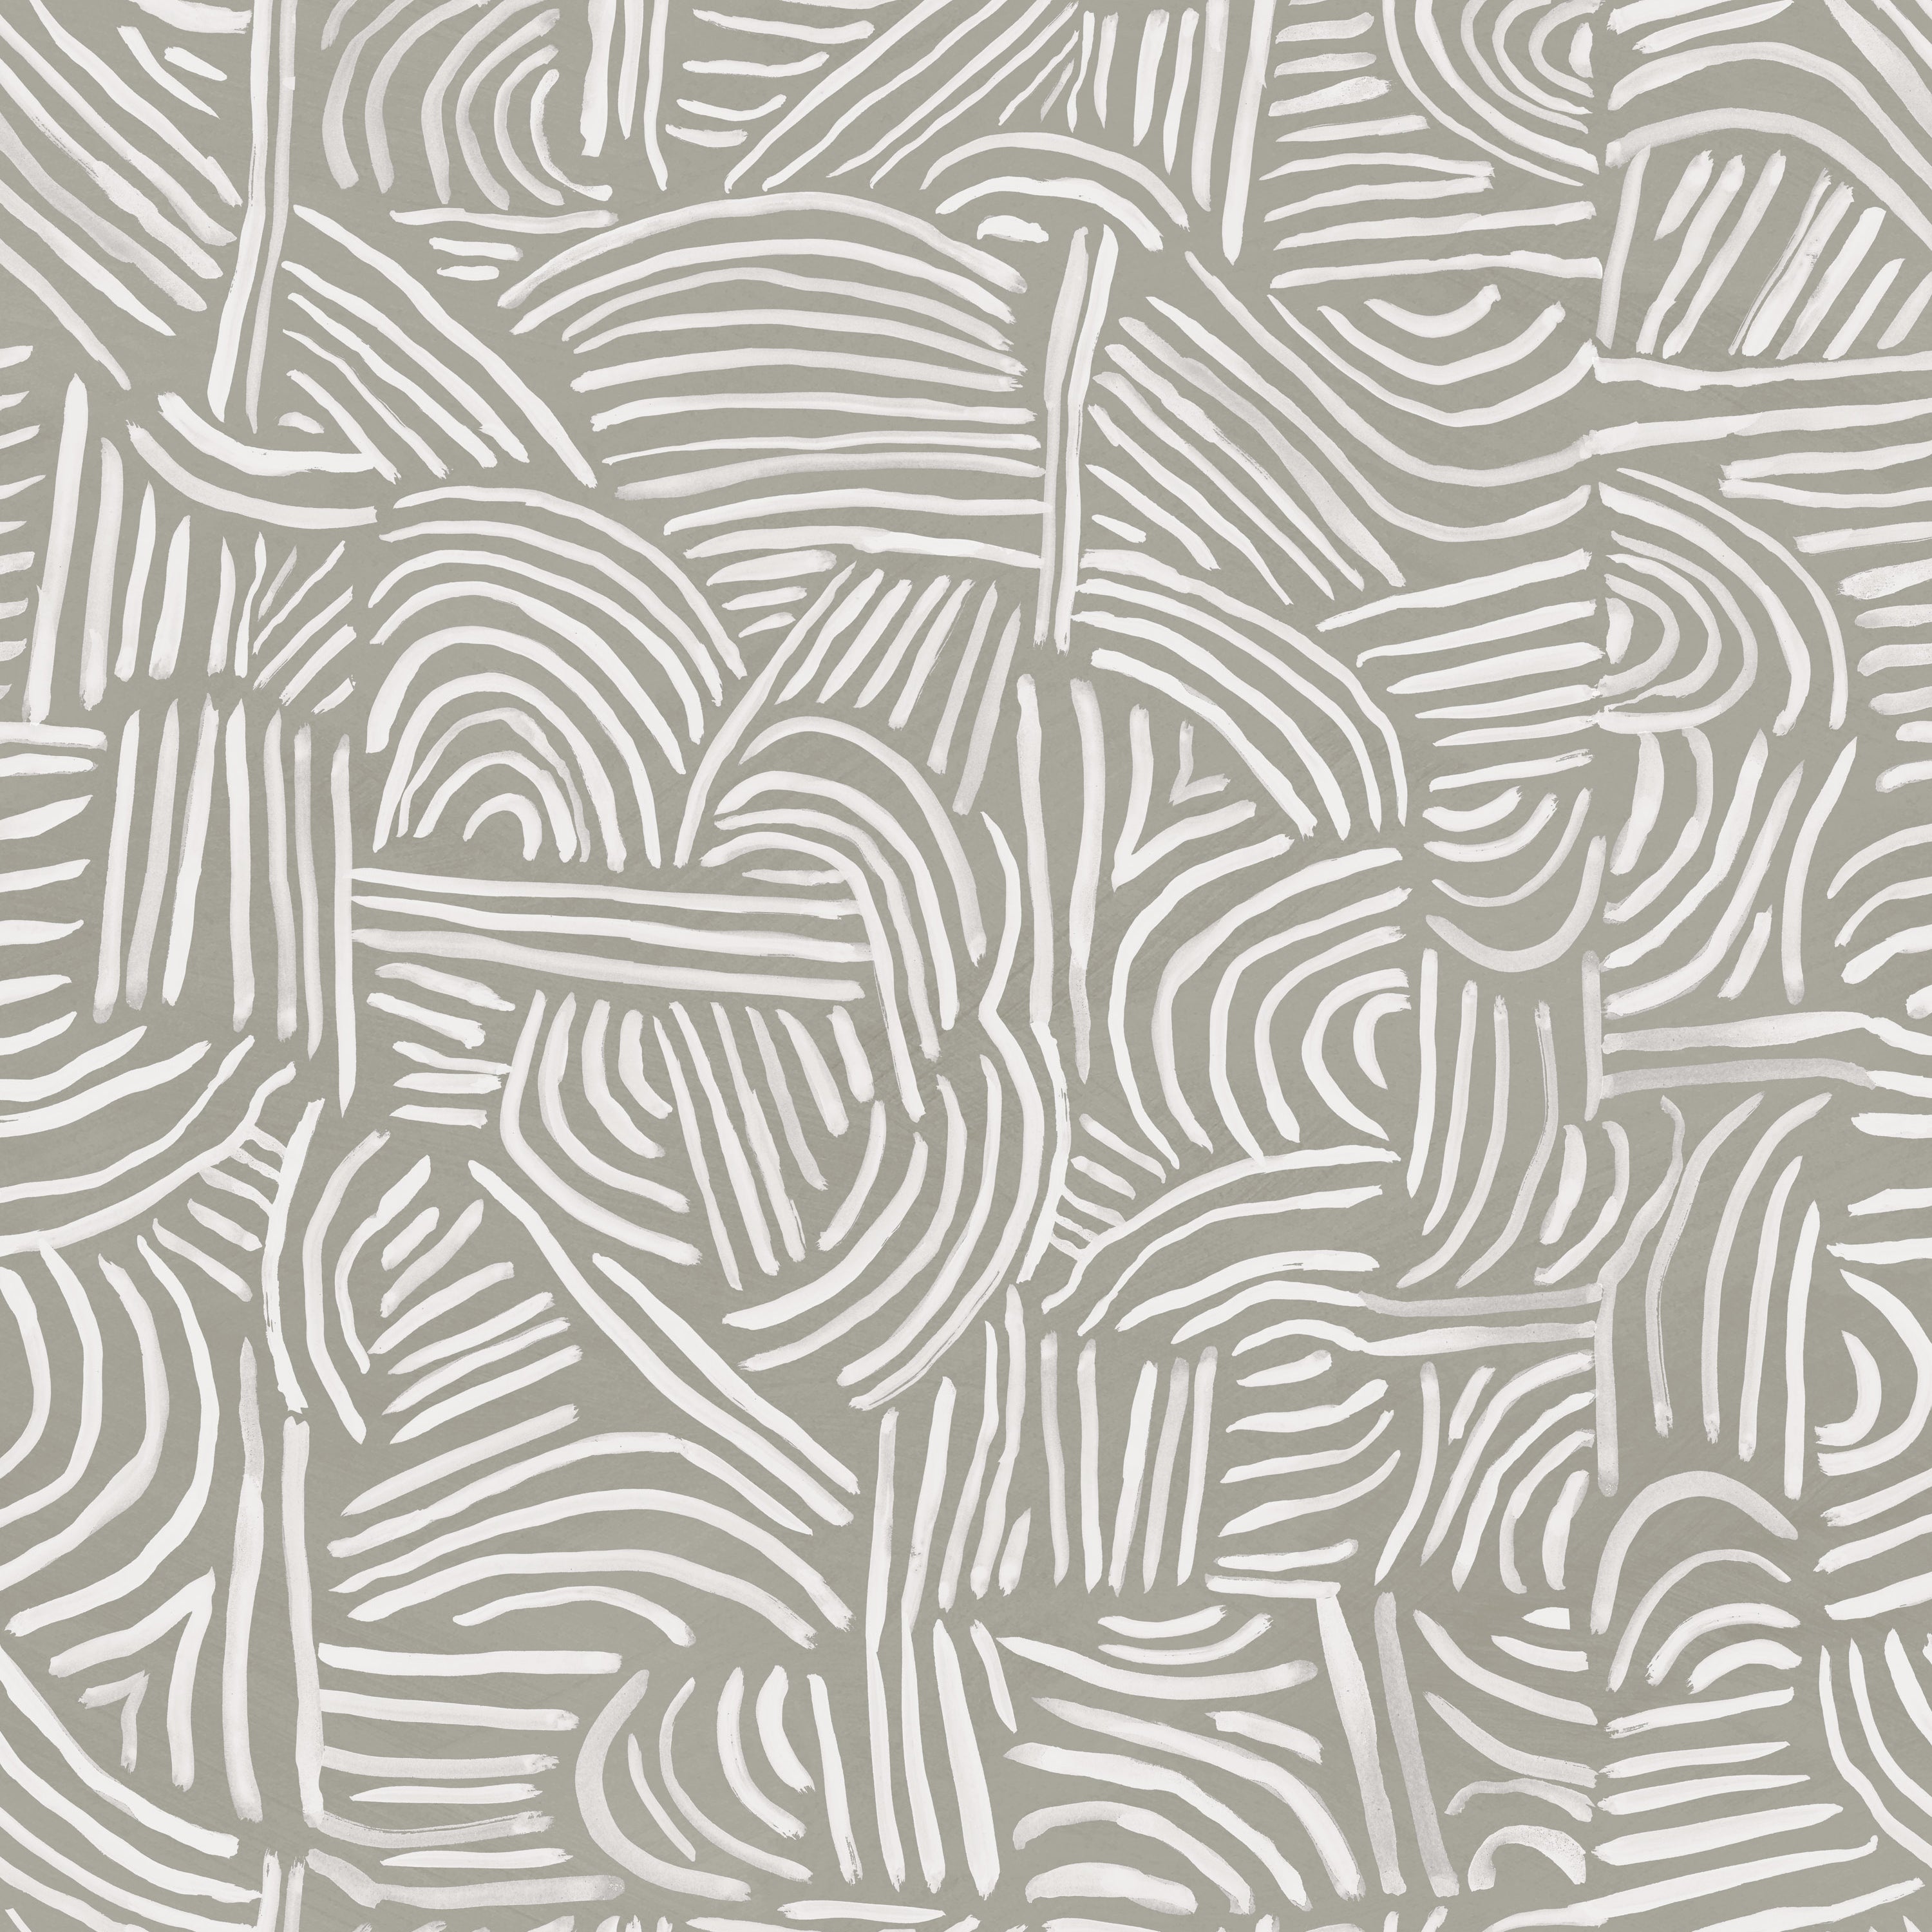 Detail of fabric in an abstract linear print in white on a sage field.